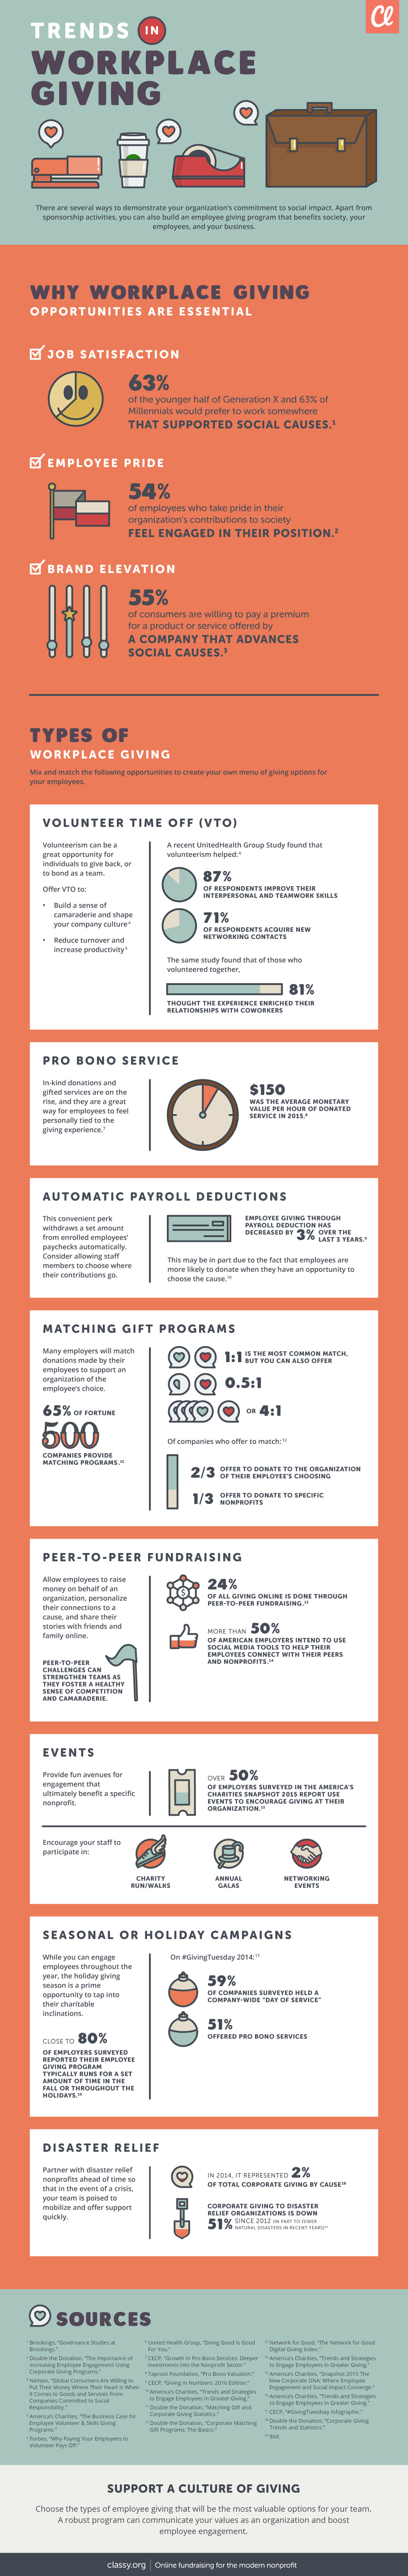 infographic workplace giving